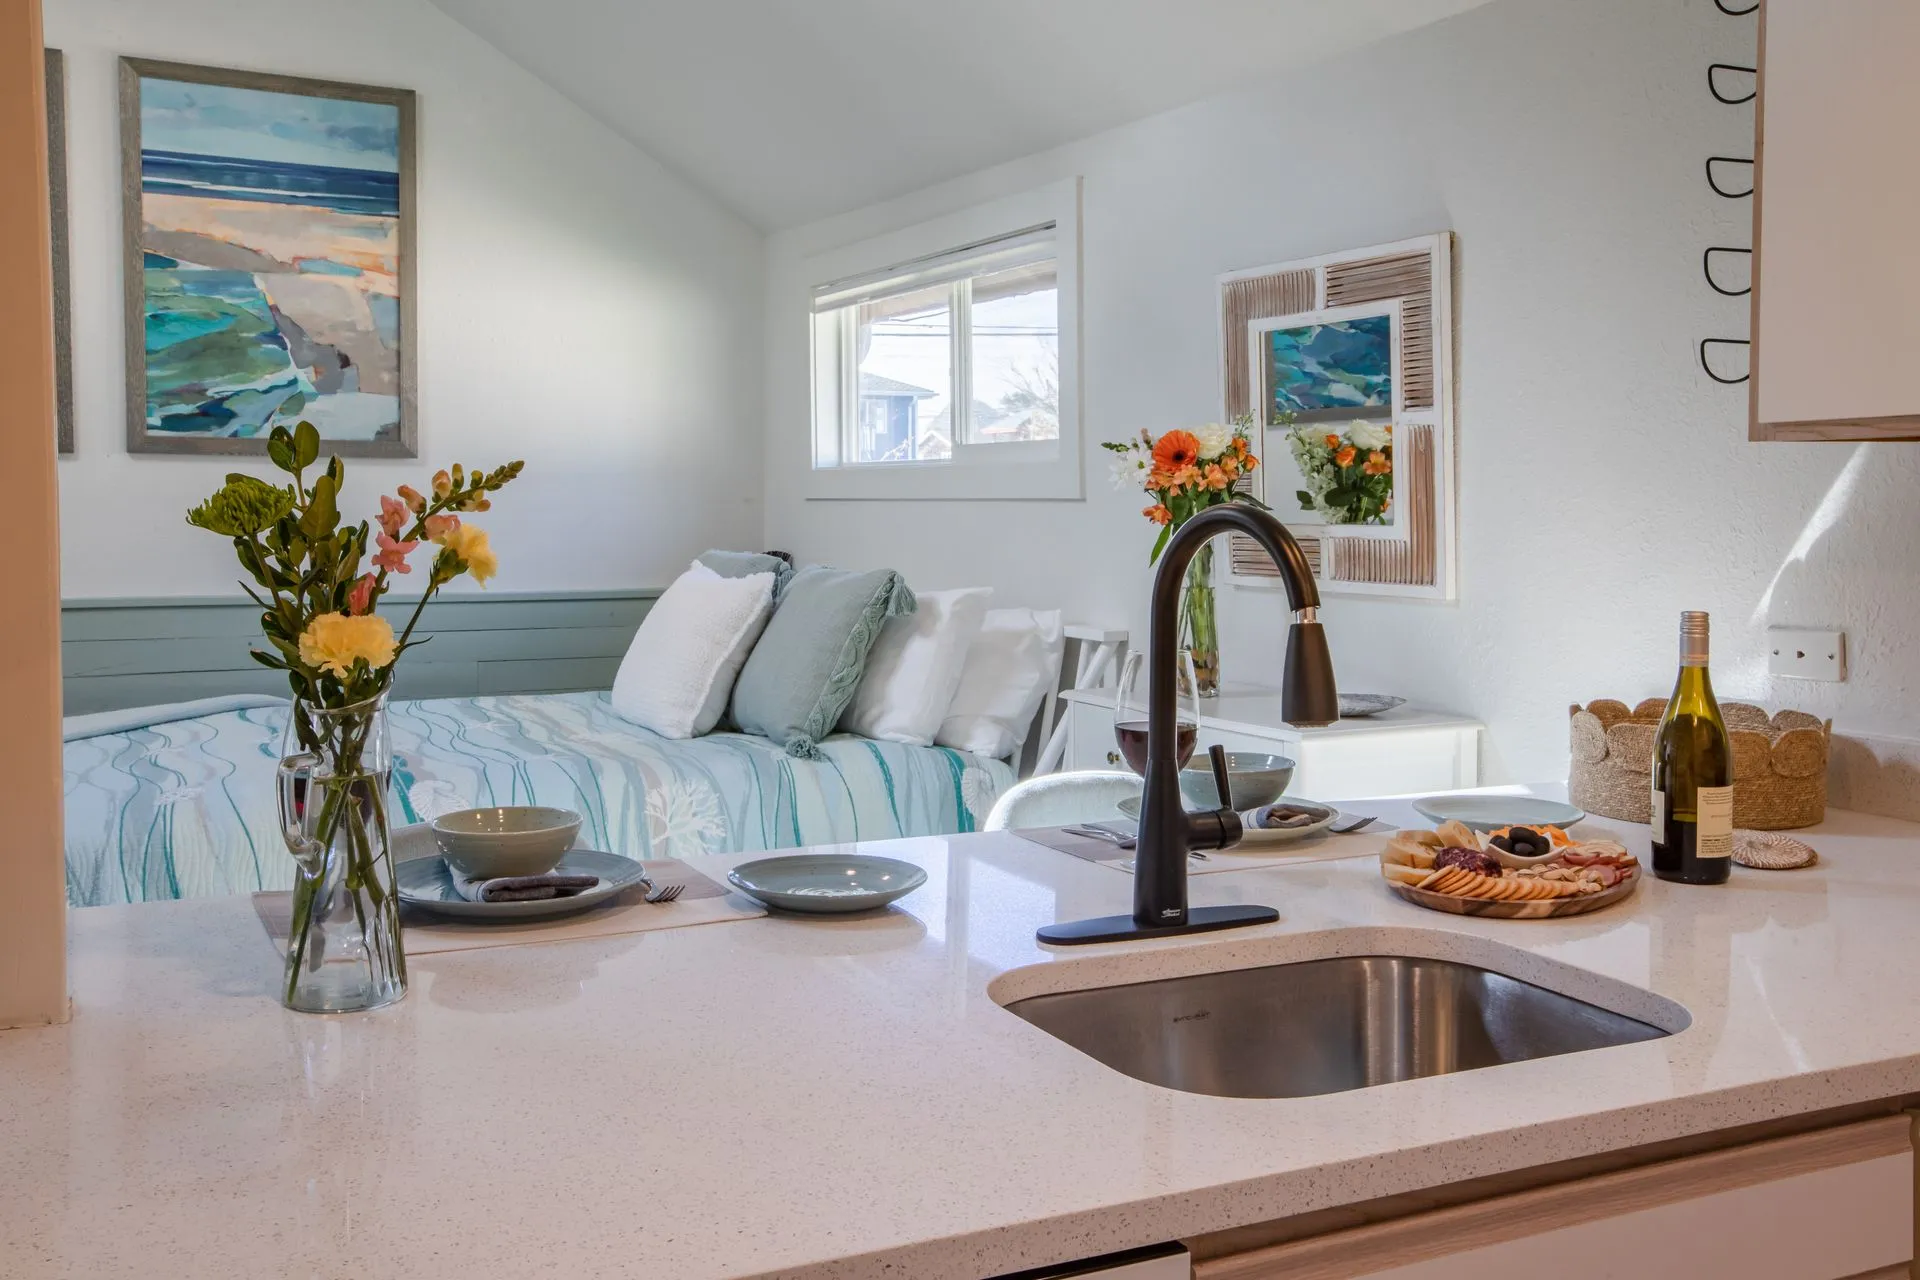 Vacation Rental in Cannon Beach, the Sand Crab sink